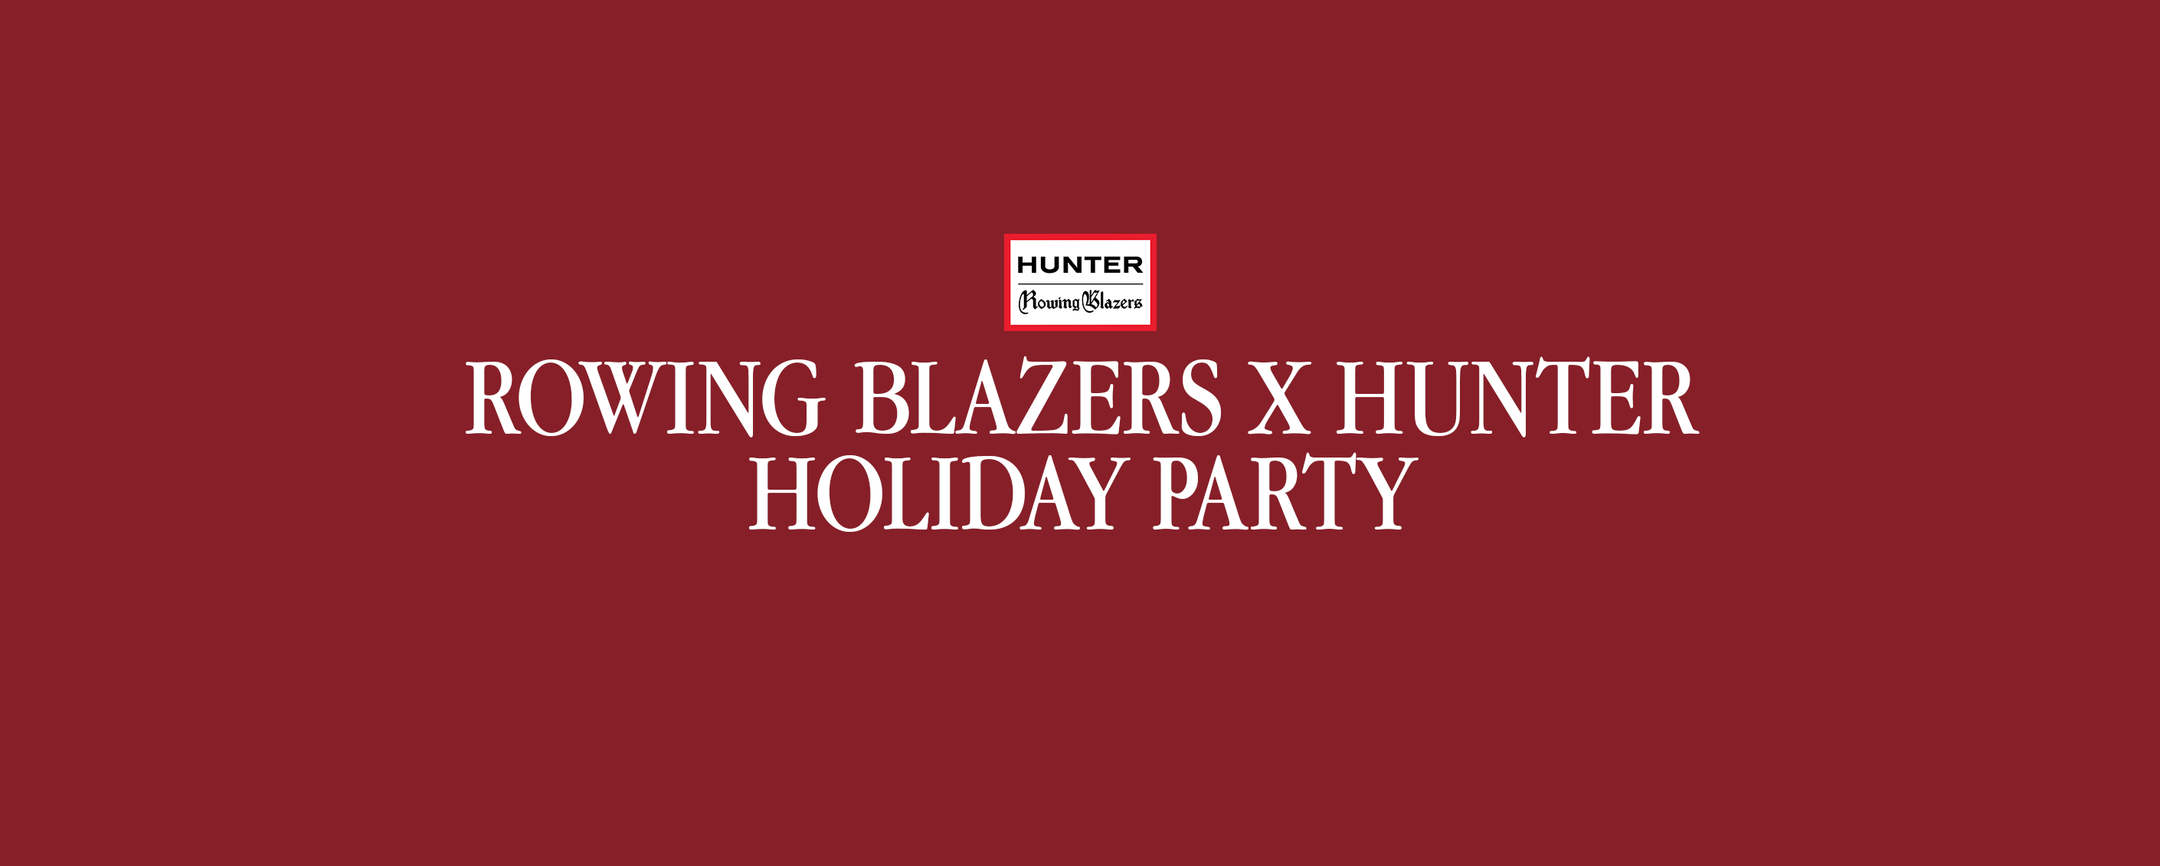 ROWING BLAZERS X HUNTER HOLIDAY PARTY